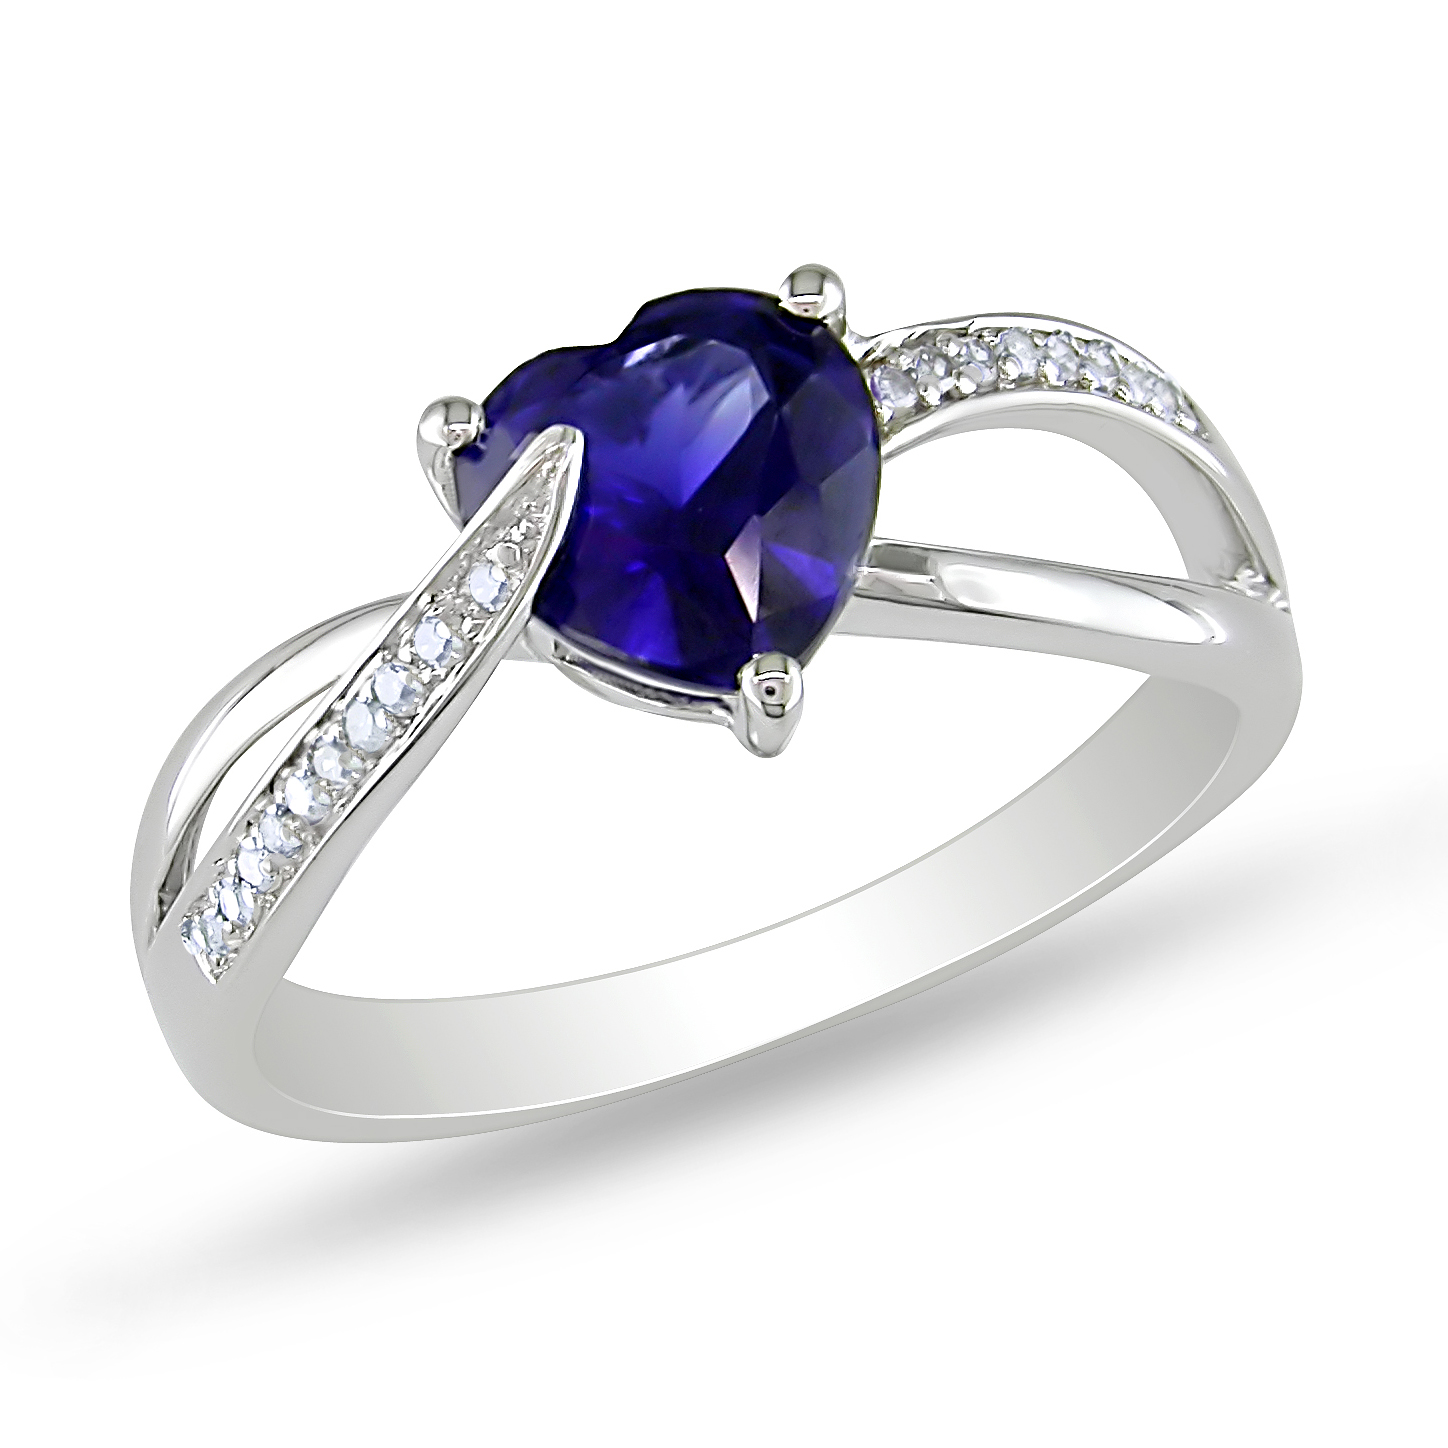 Amour 0.05 Carat T.W. Diamond and 1 7/8 Carat T.G.W. Created Blue Sapphire Fashion Ring in Sterling Silver GH I3